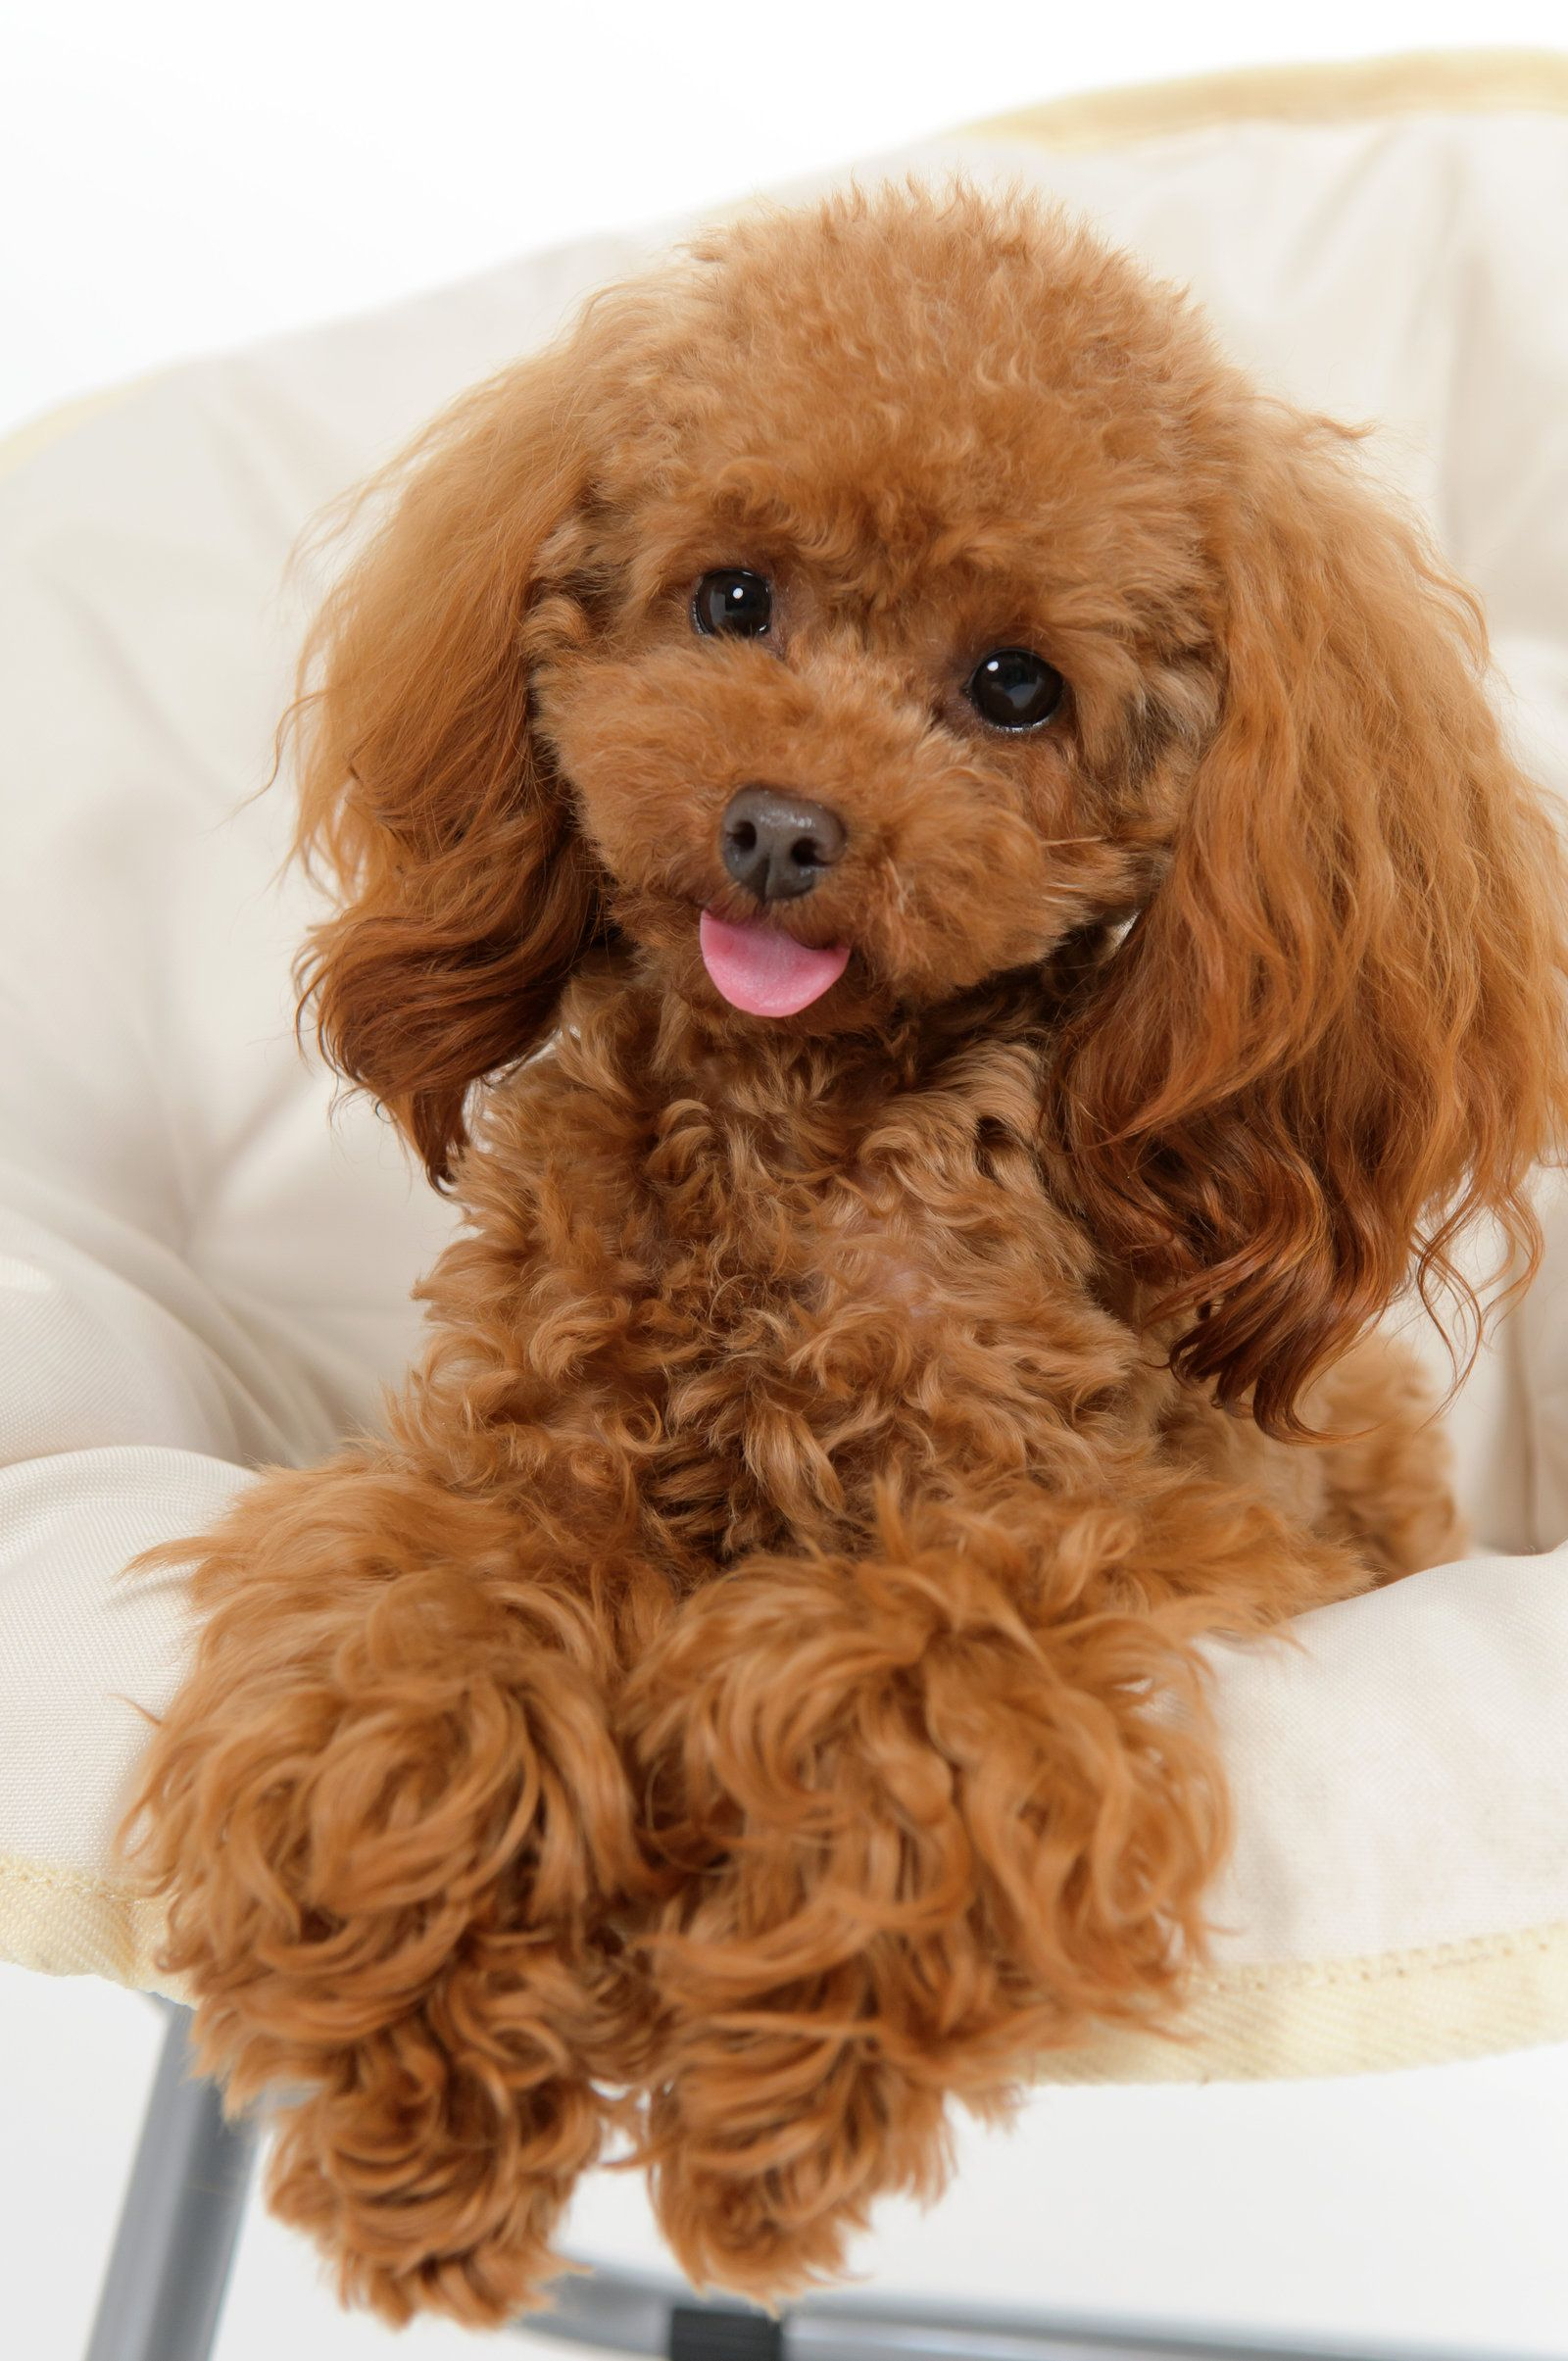 1600x2409 Cuddly Poodle Wallpapers by bubupoodle on deviantART | Poodle haircut, Poodle grooming, Dog training